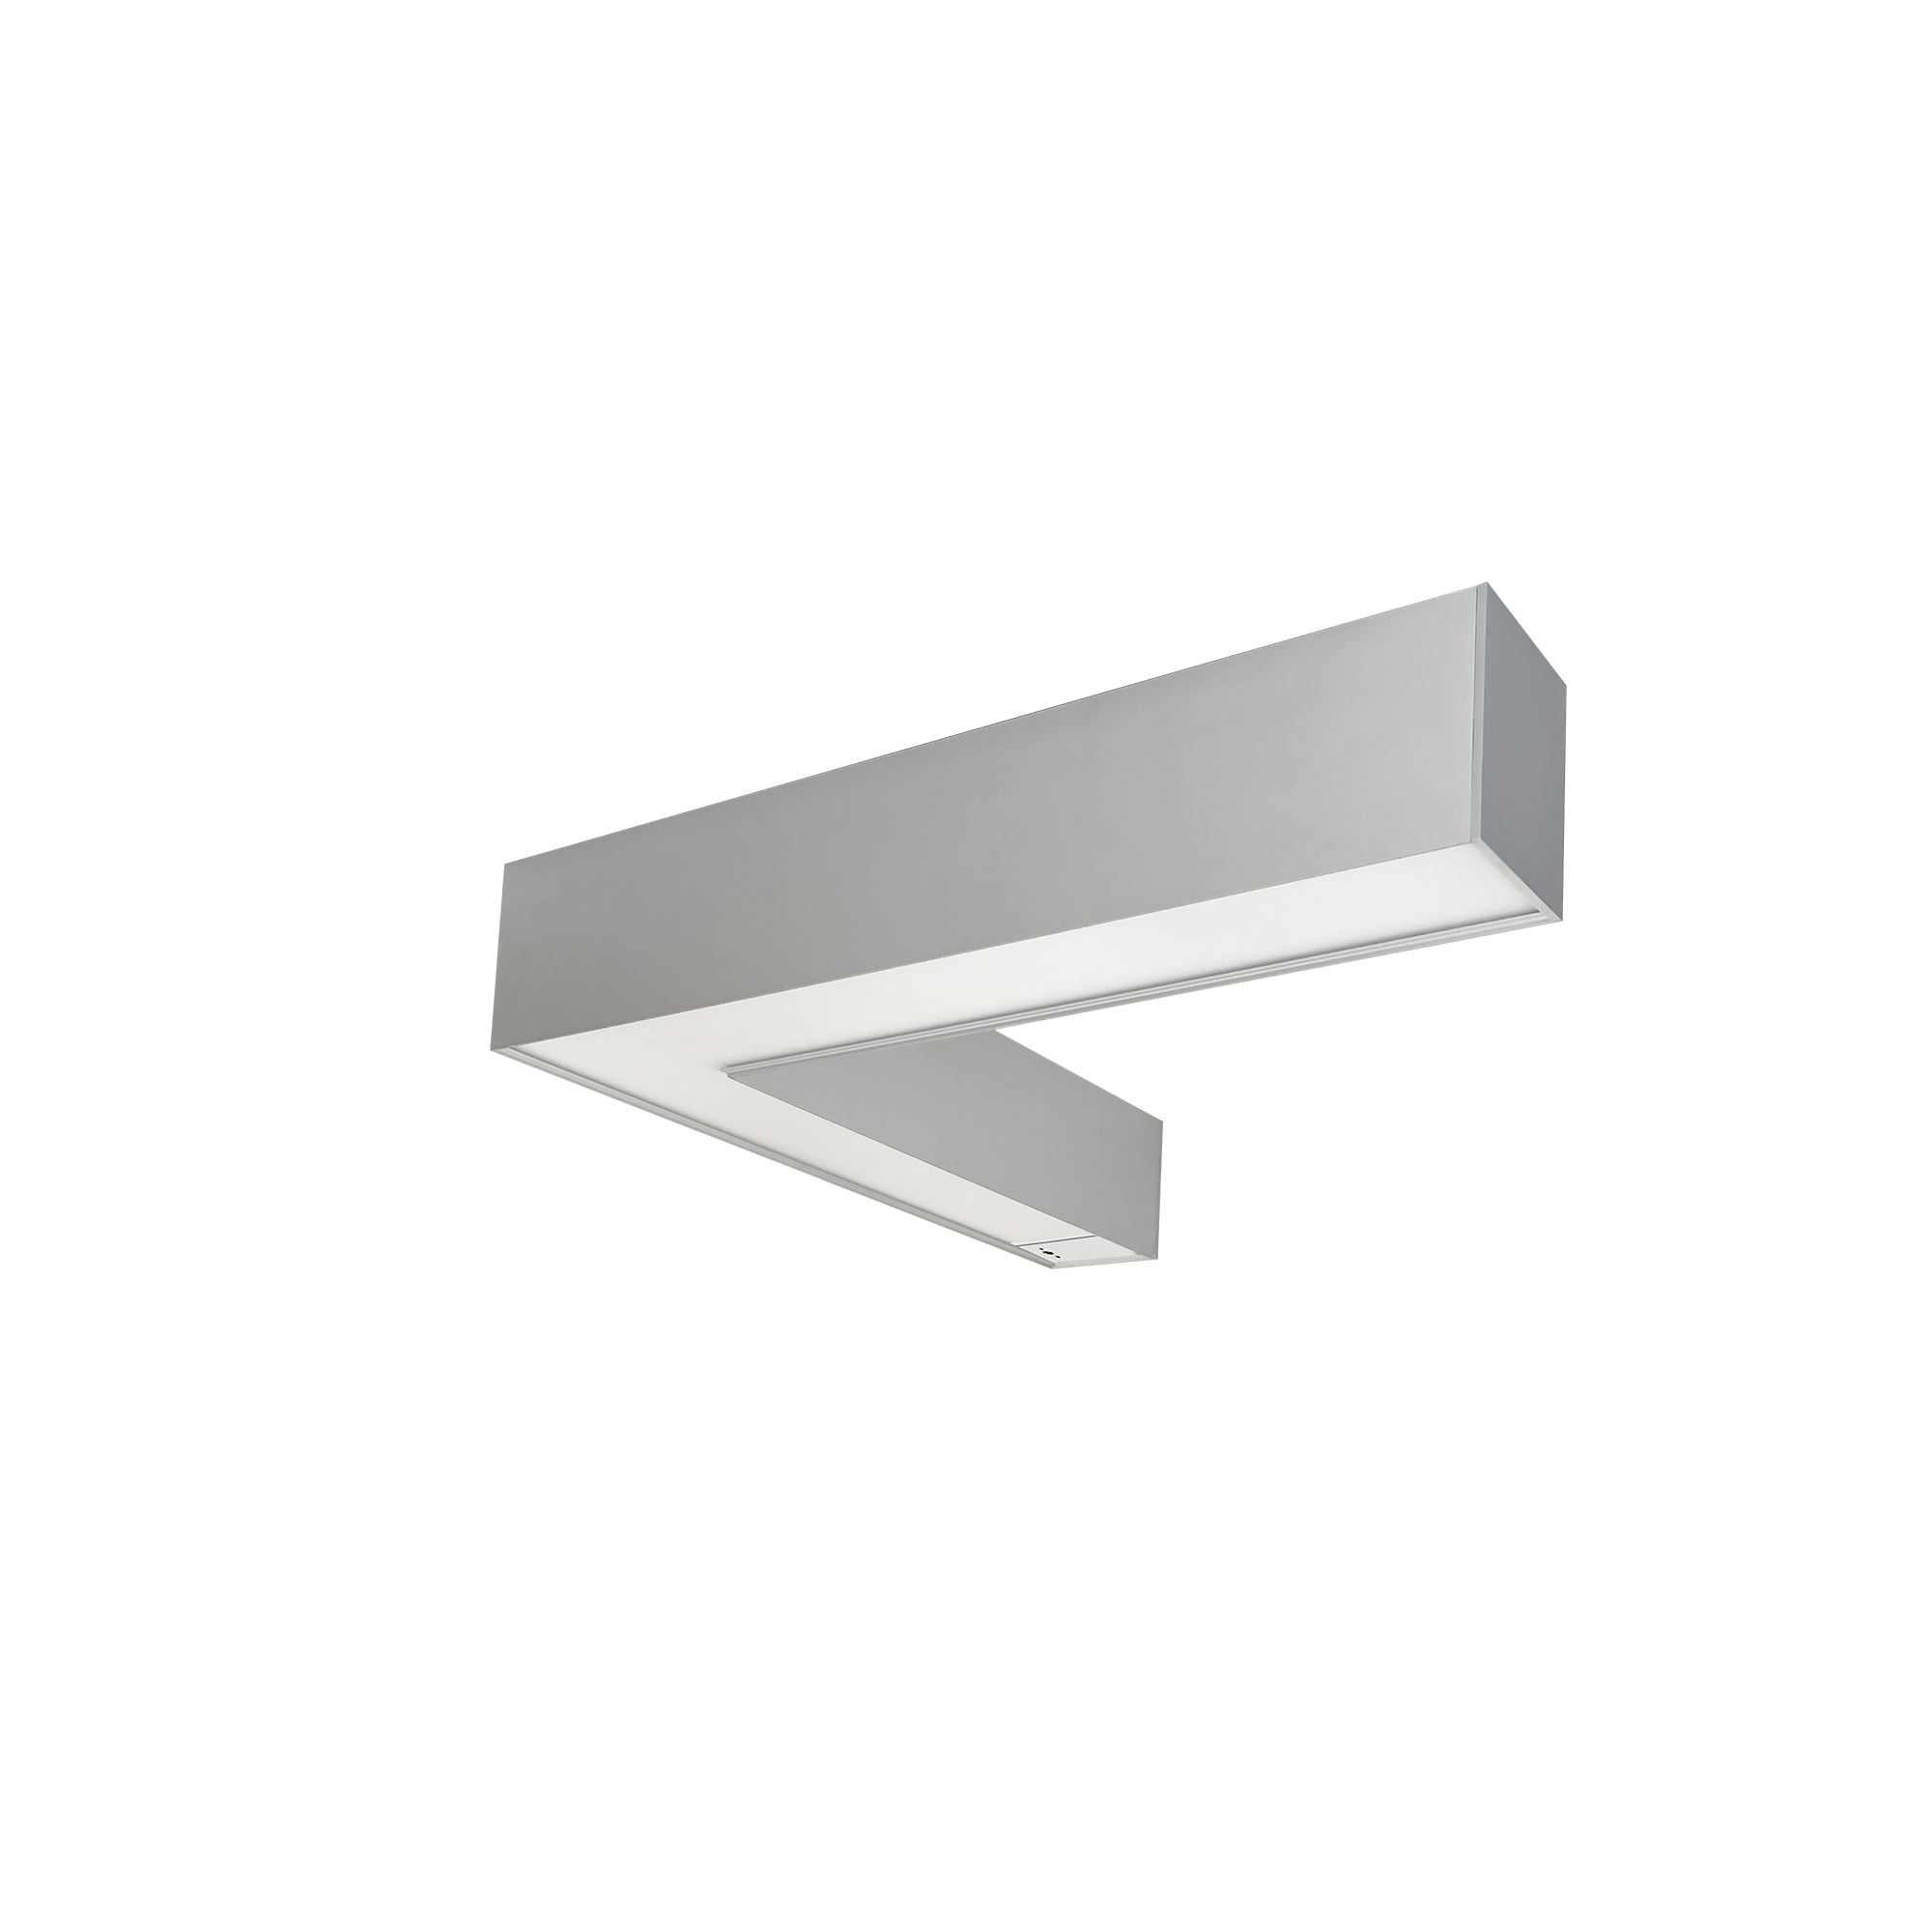 Nora Lighting NLUD-L334A/OS - Linear -  InchL Inch Shaped L-Line LED Indirect/Direct Linear, 3781lm / Selectable CCT, Aluminum Finish, with Motion Sensor